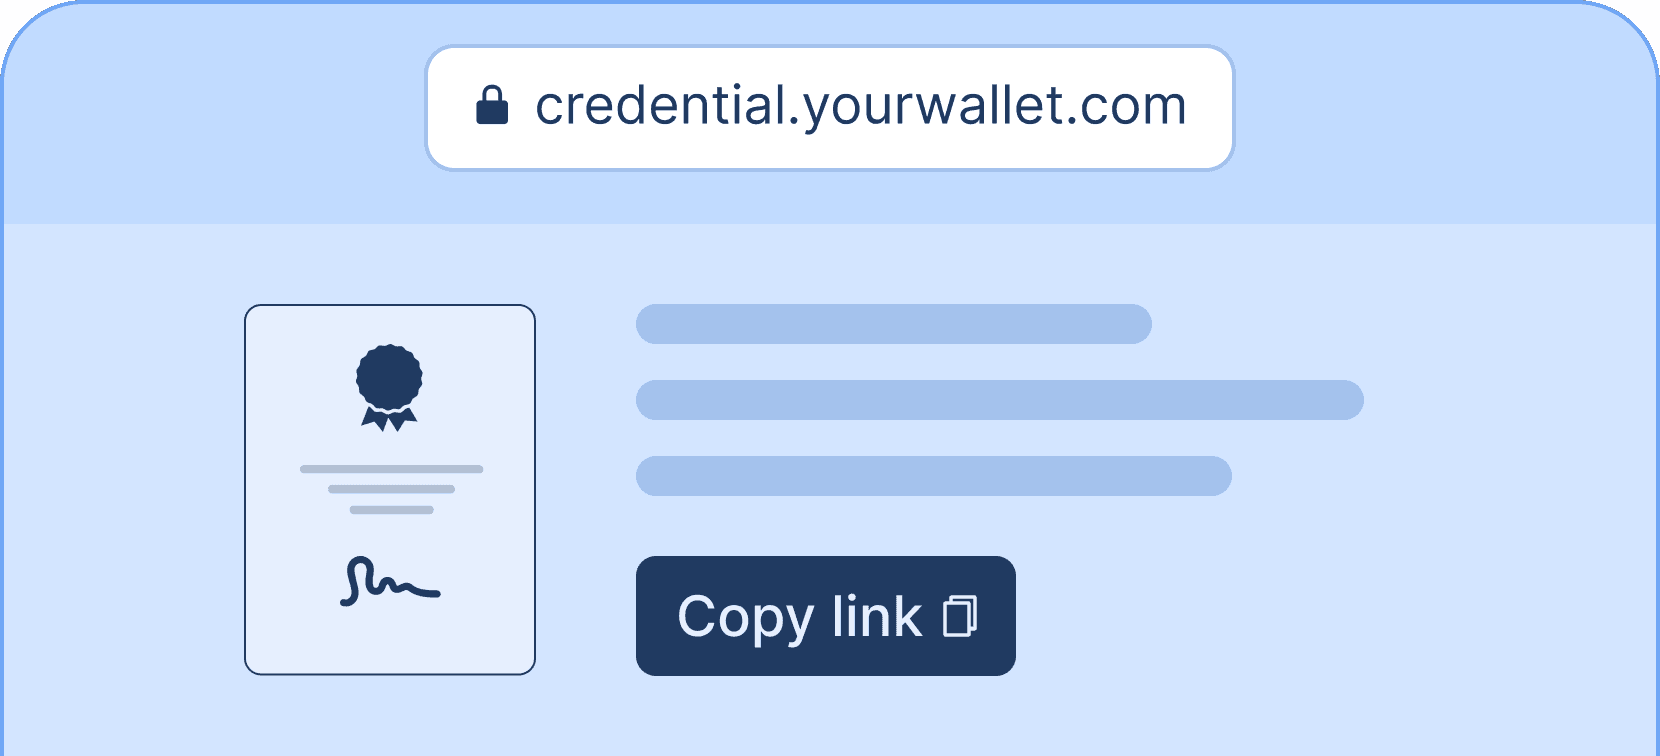 certifier-features-create-shareable-credential-urls